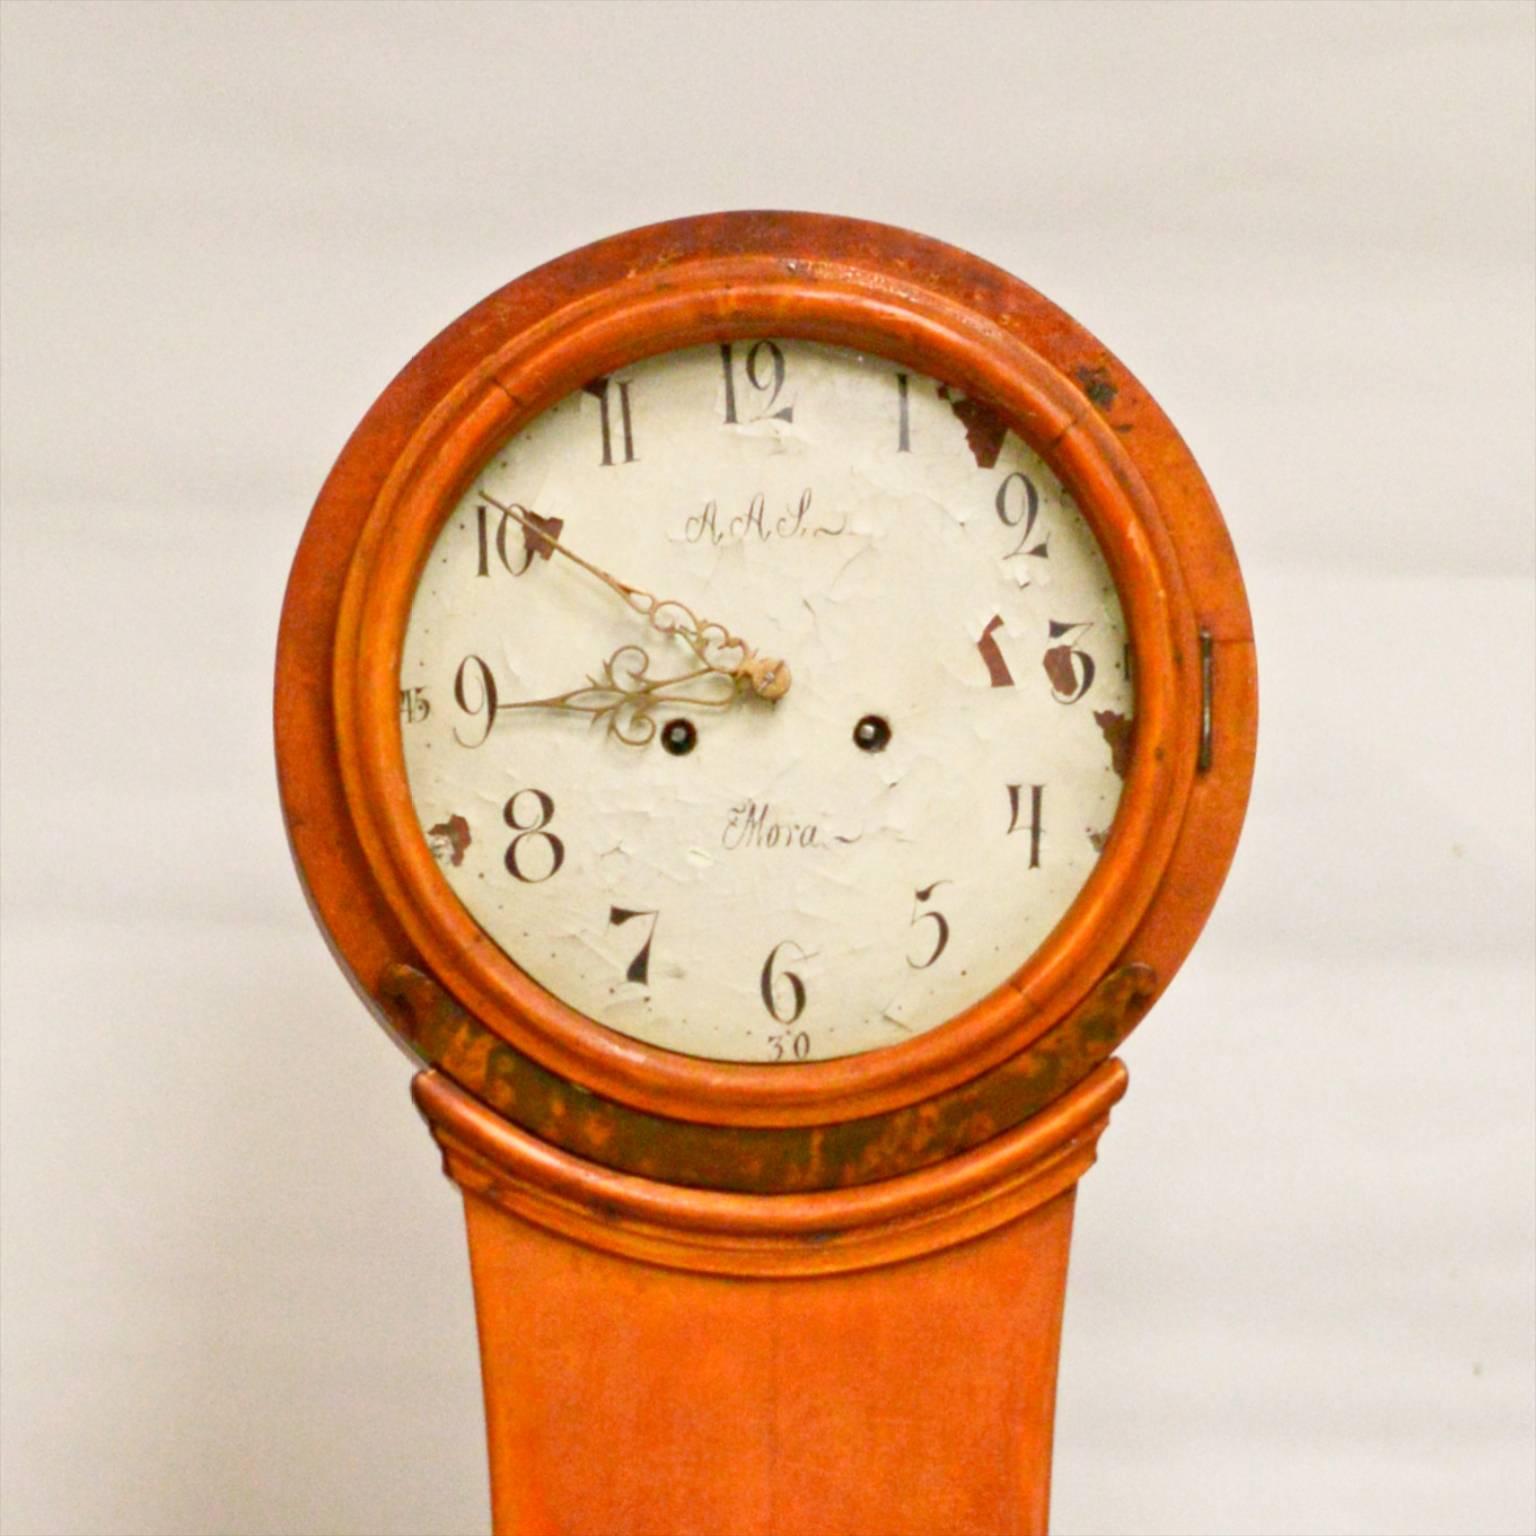 Unusual example of a decorative 1800s antique Swedish Mora clock with natural finish body and plinth with the rare sun motif carving on the belly.

This original 1800s Mora clock has a beautiful face with a clean patina, simple and elegant.

The